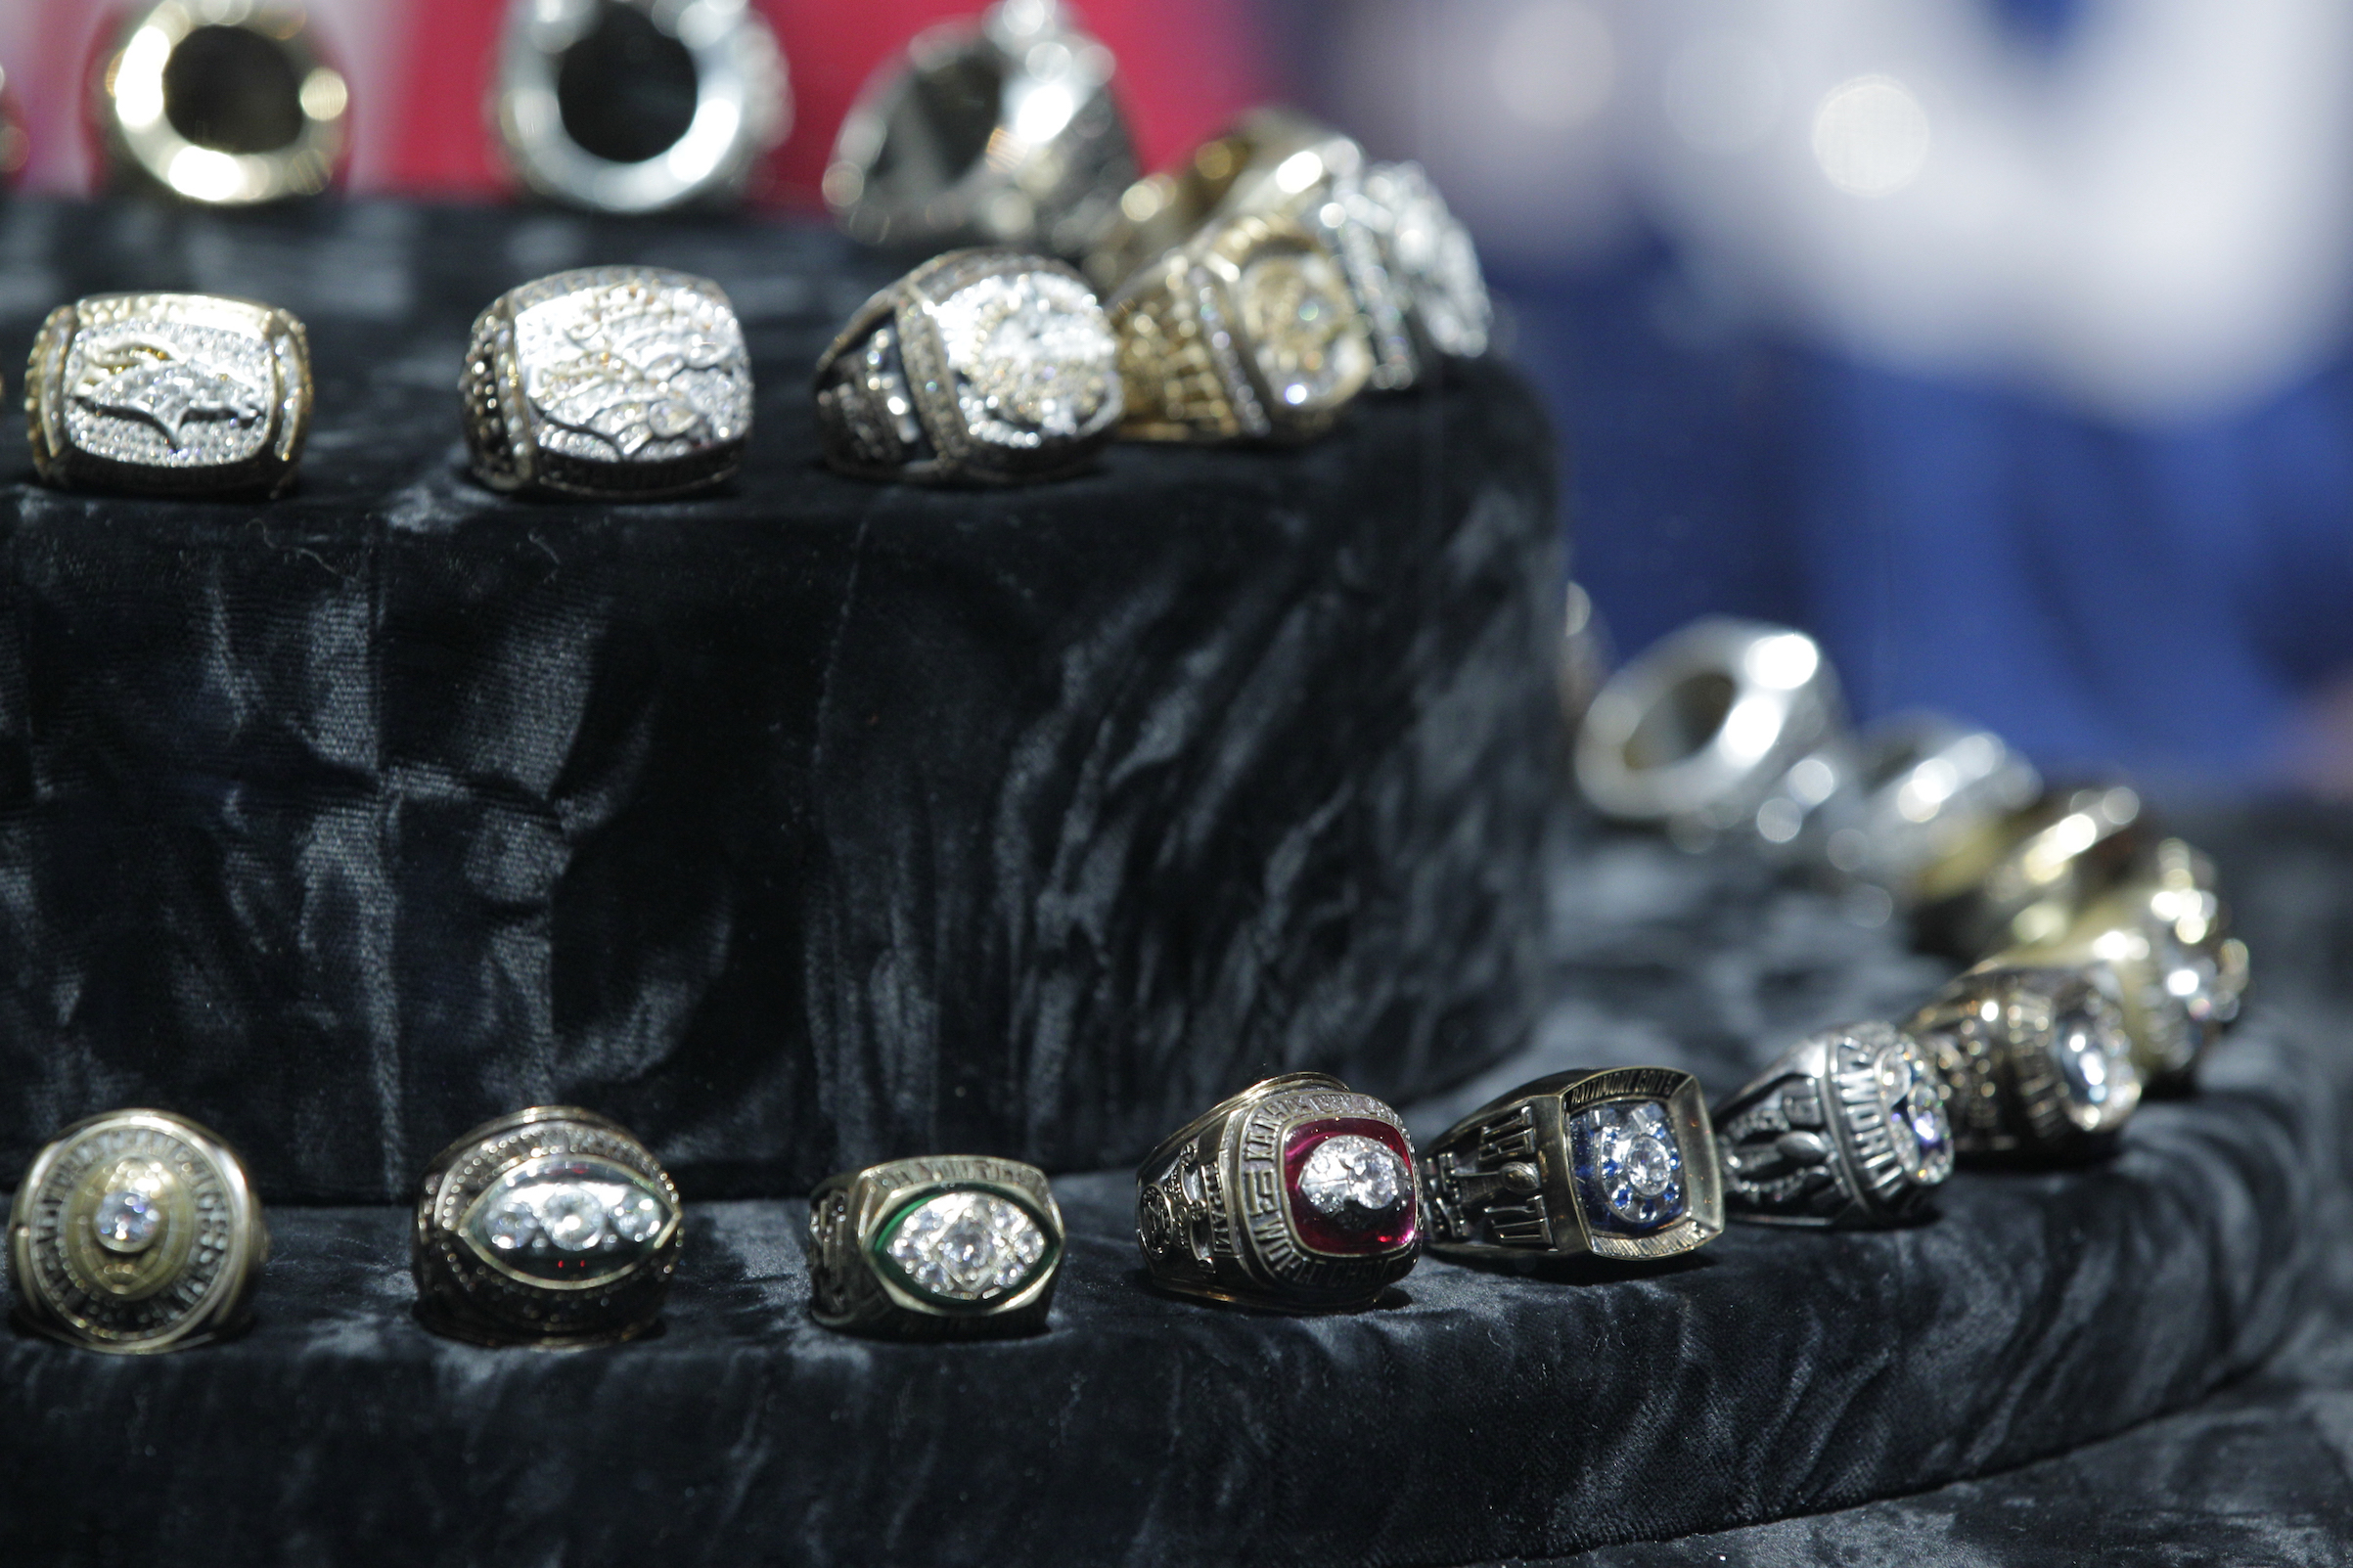 Past Super Bowl rings on display in 2012 (NBC / Getty Images)